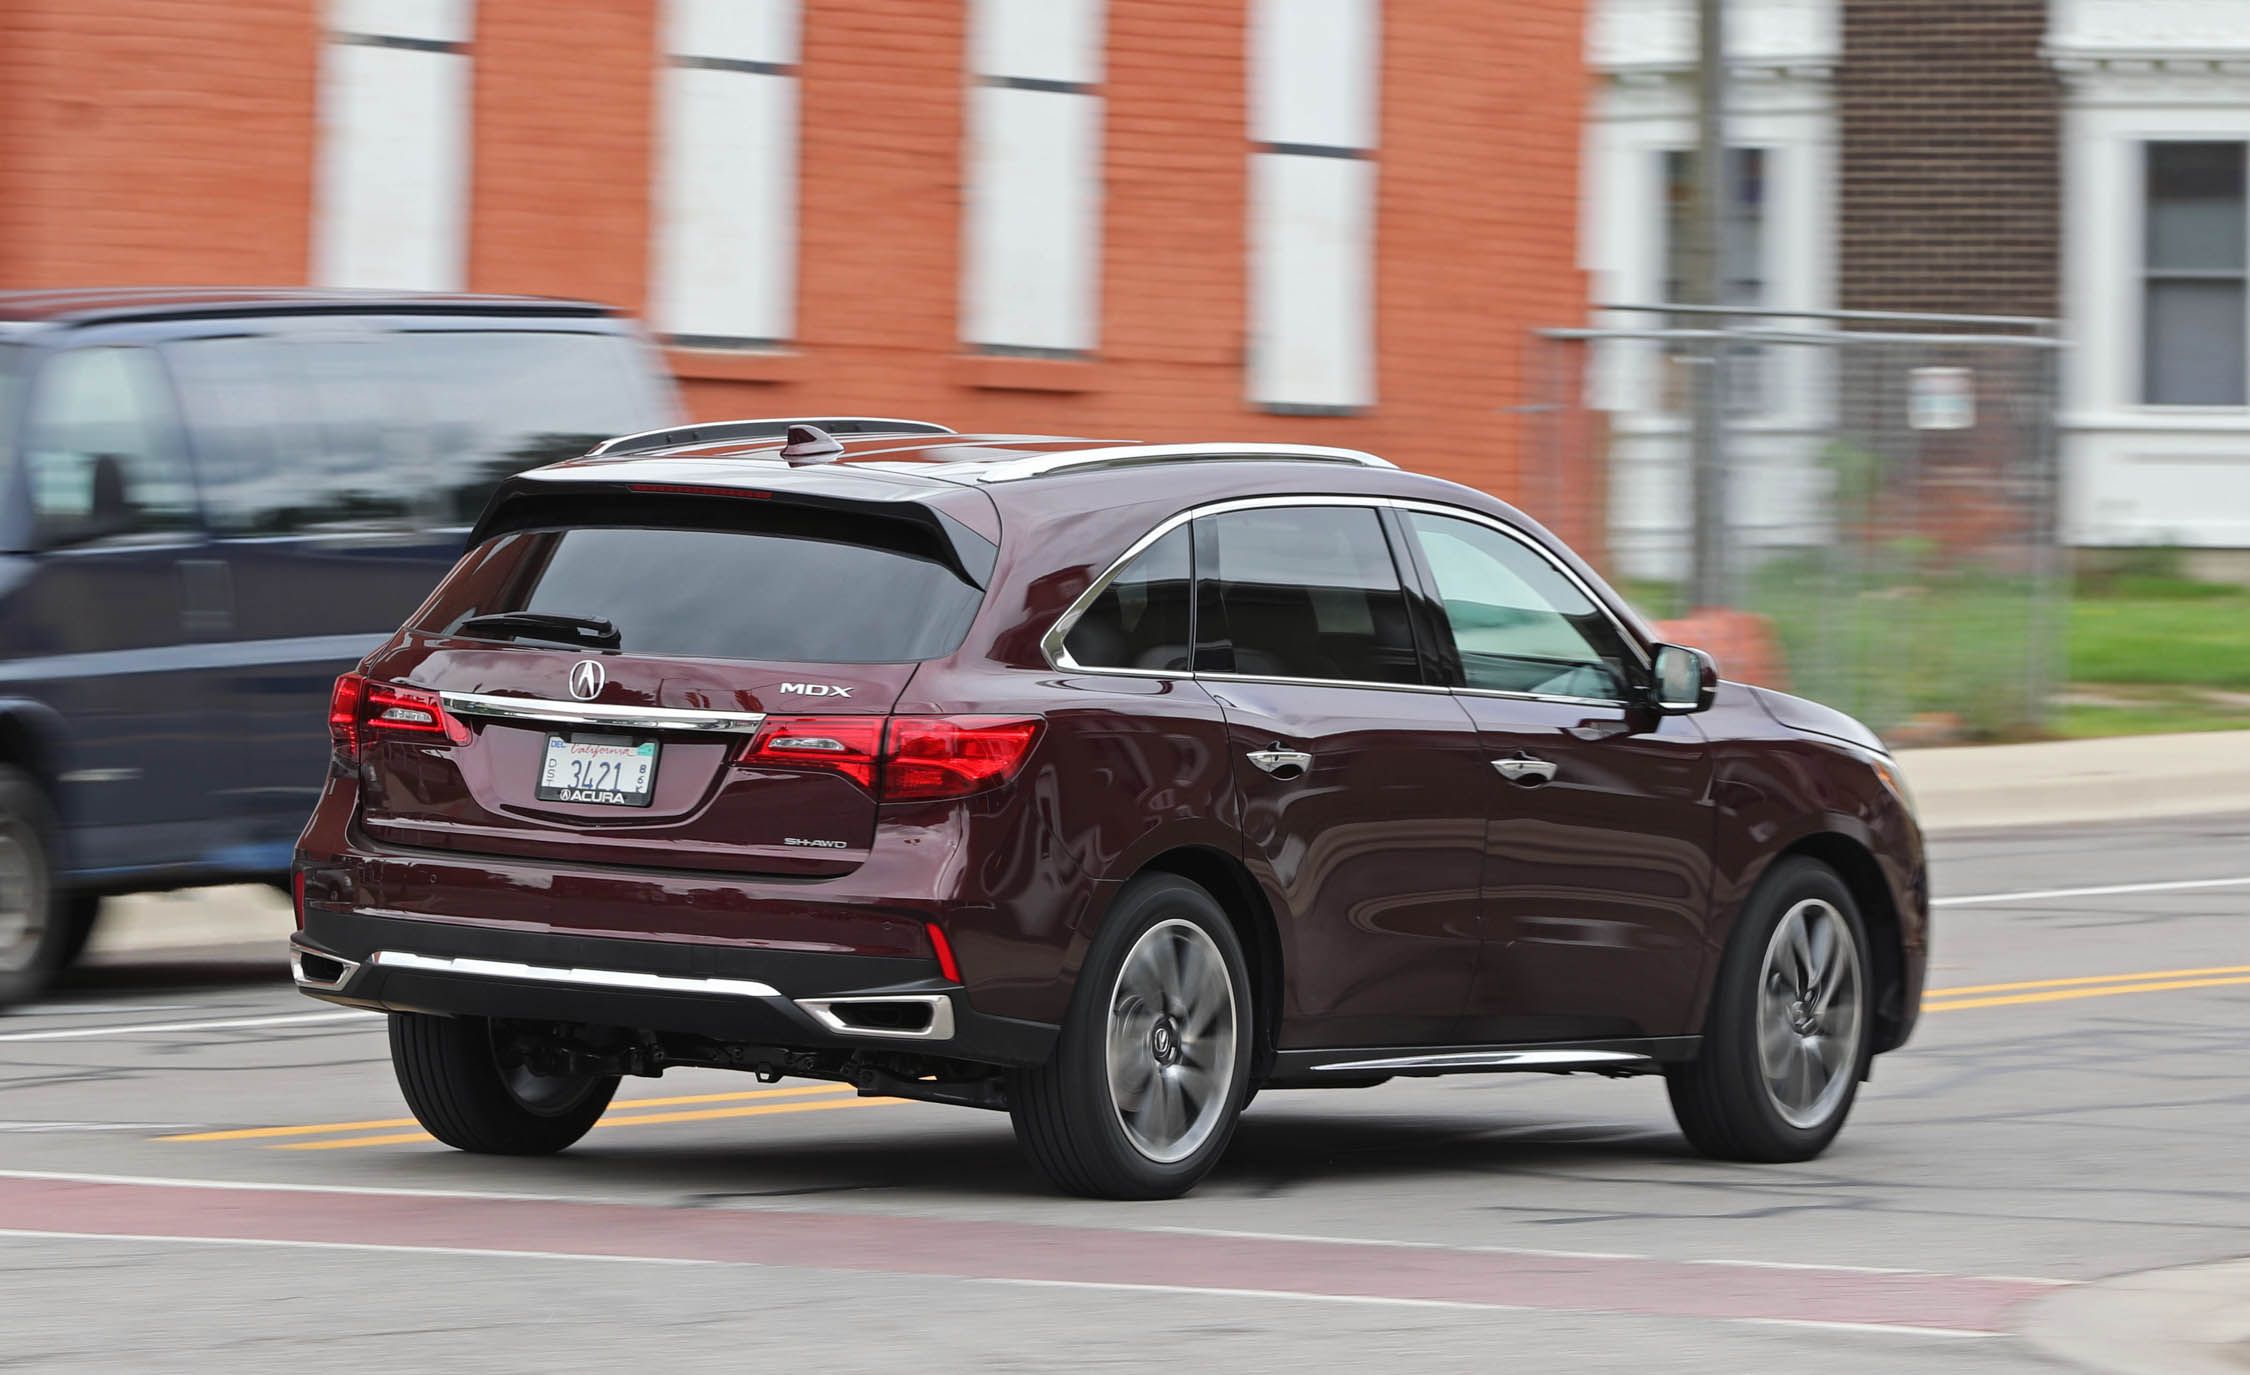 2017 Acura Mdx Test Drive Rear And Side View (View 8 of 22)